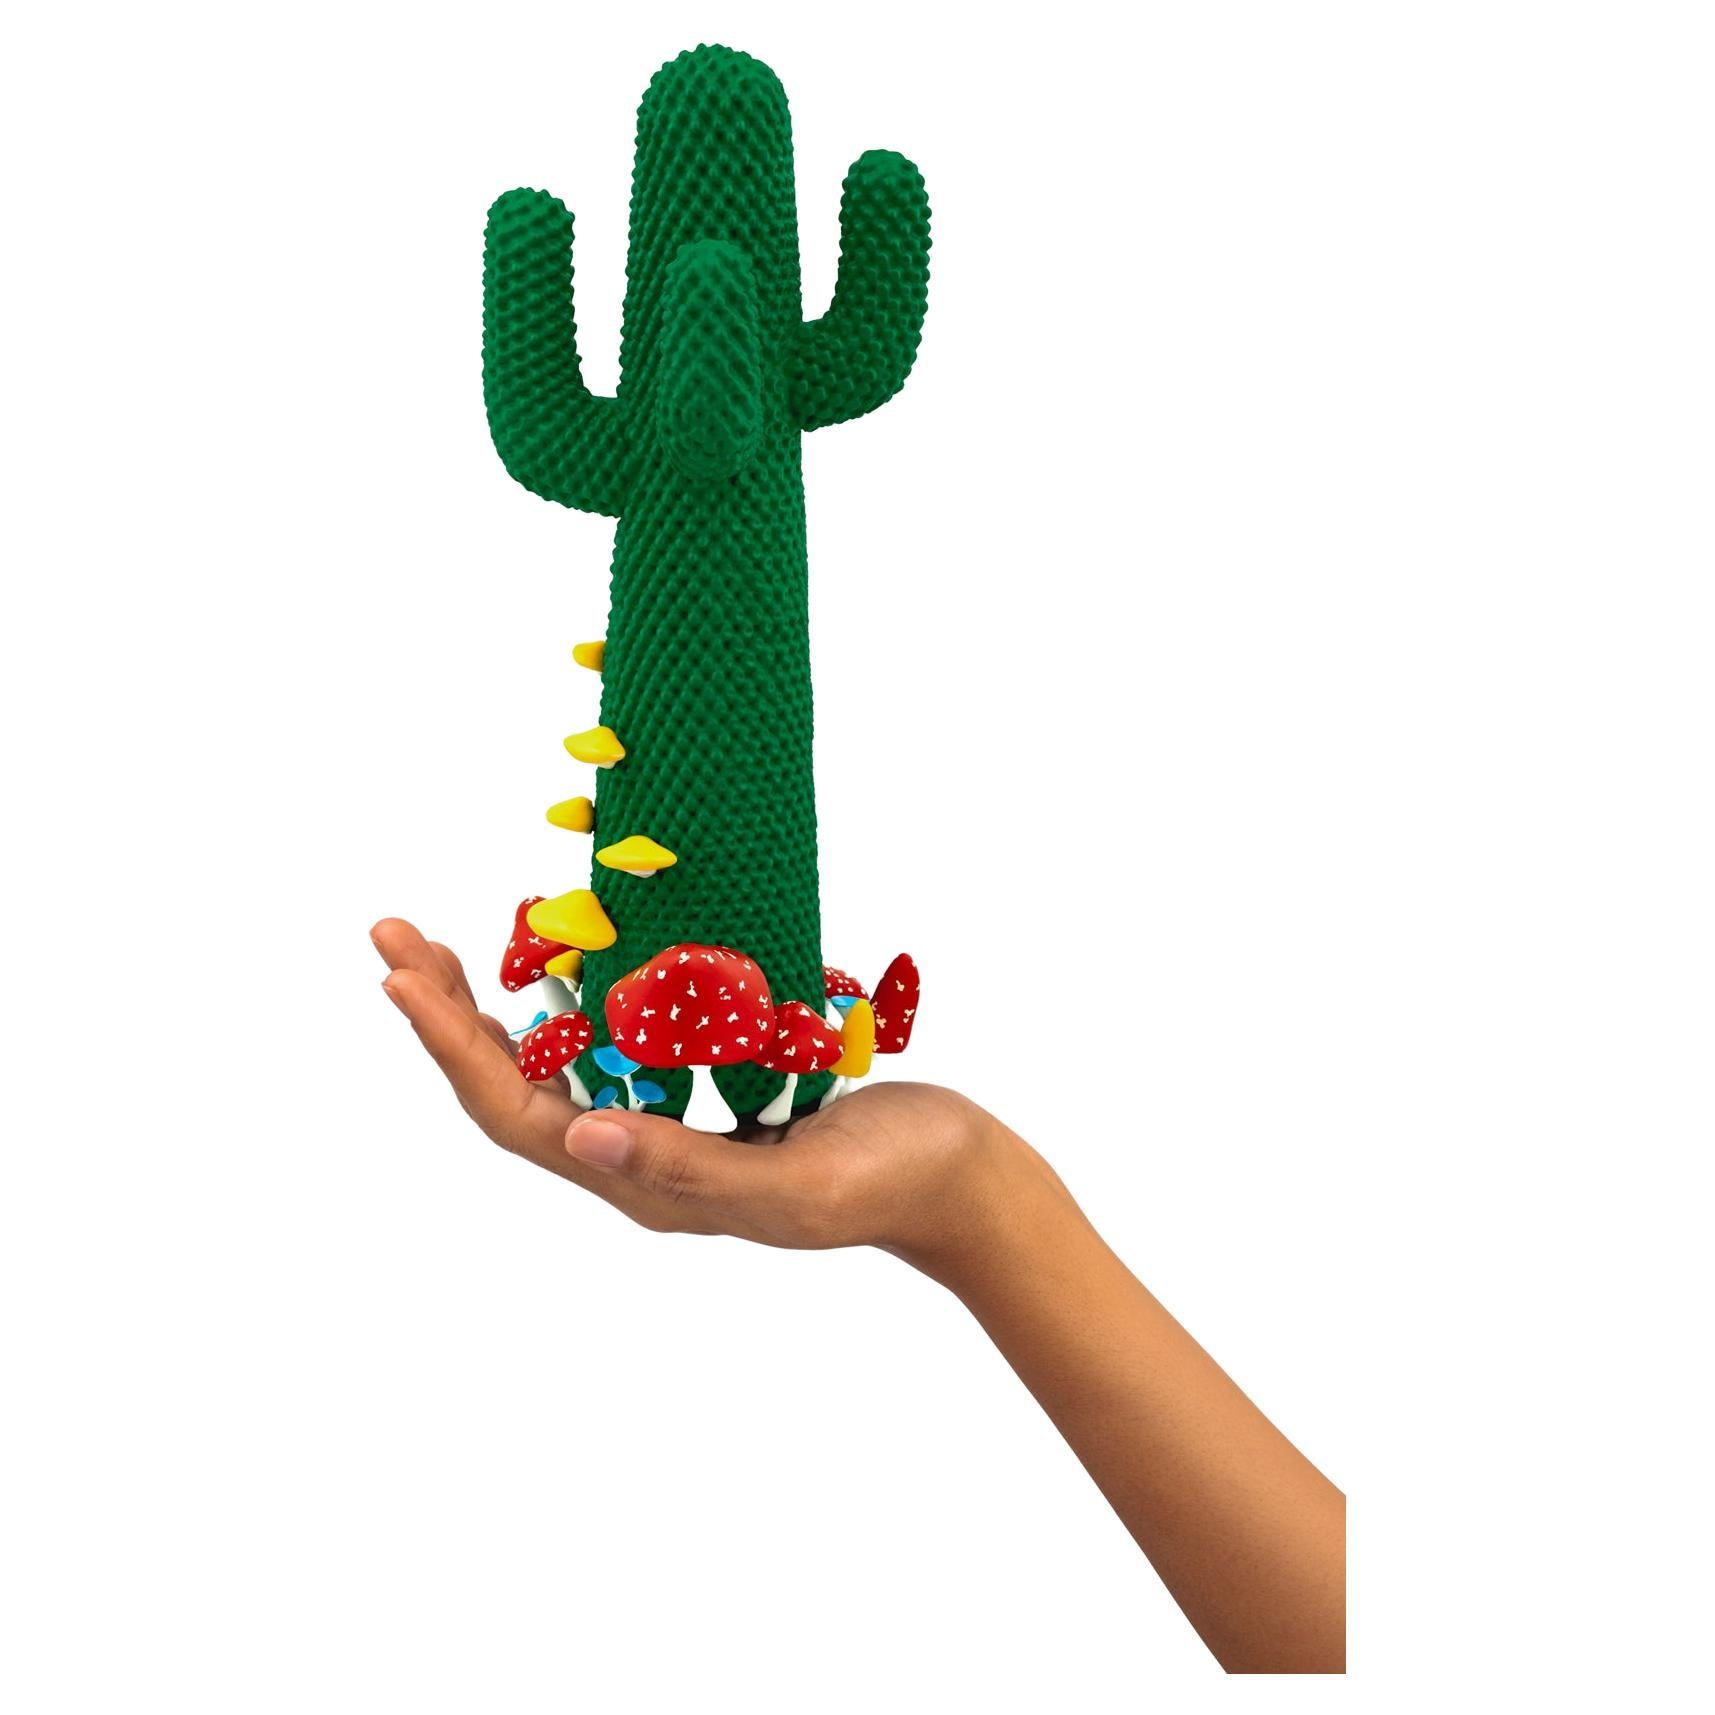 LIMITED EDITION #63/99

Gufram presents the miniaturised version of the Shroom CACTUS® created in collaboration with A$AP Rocky and the artist’s new design studio HOMMEMADE Exactly as the real-size Shroom CACTUS®, the new Guframini piece features